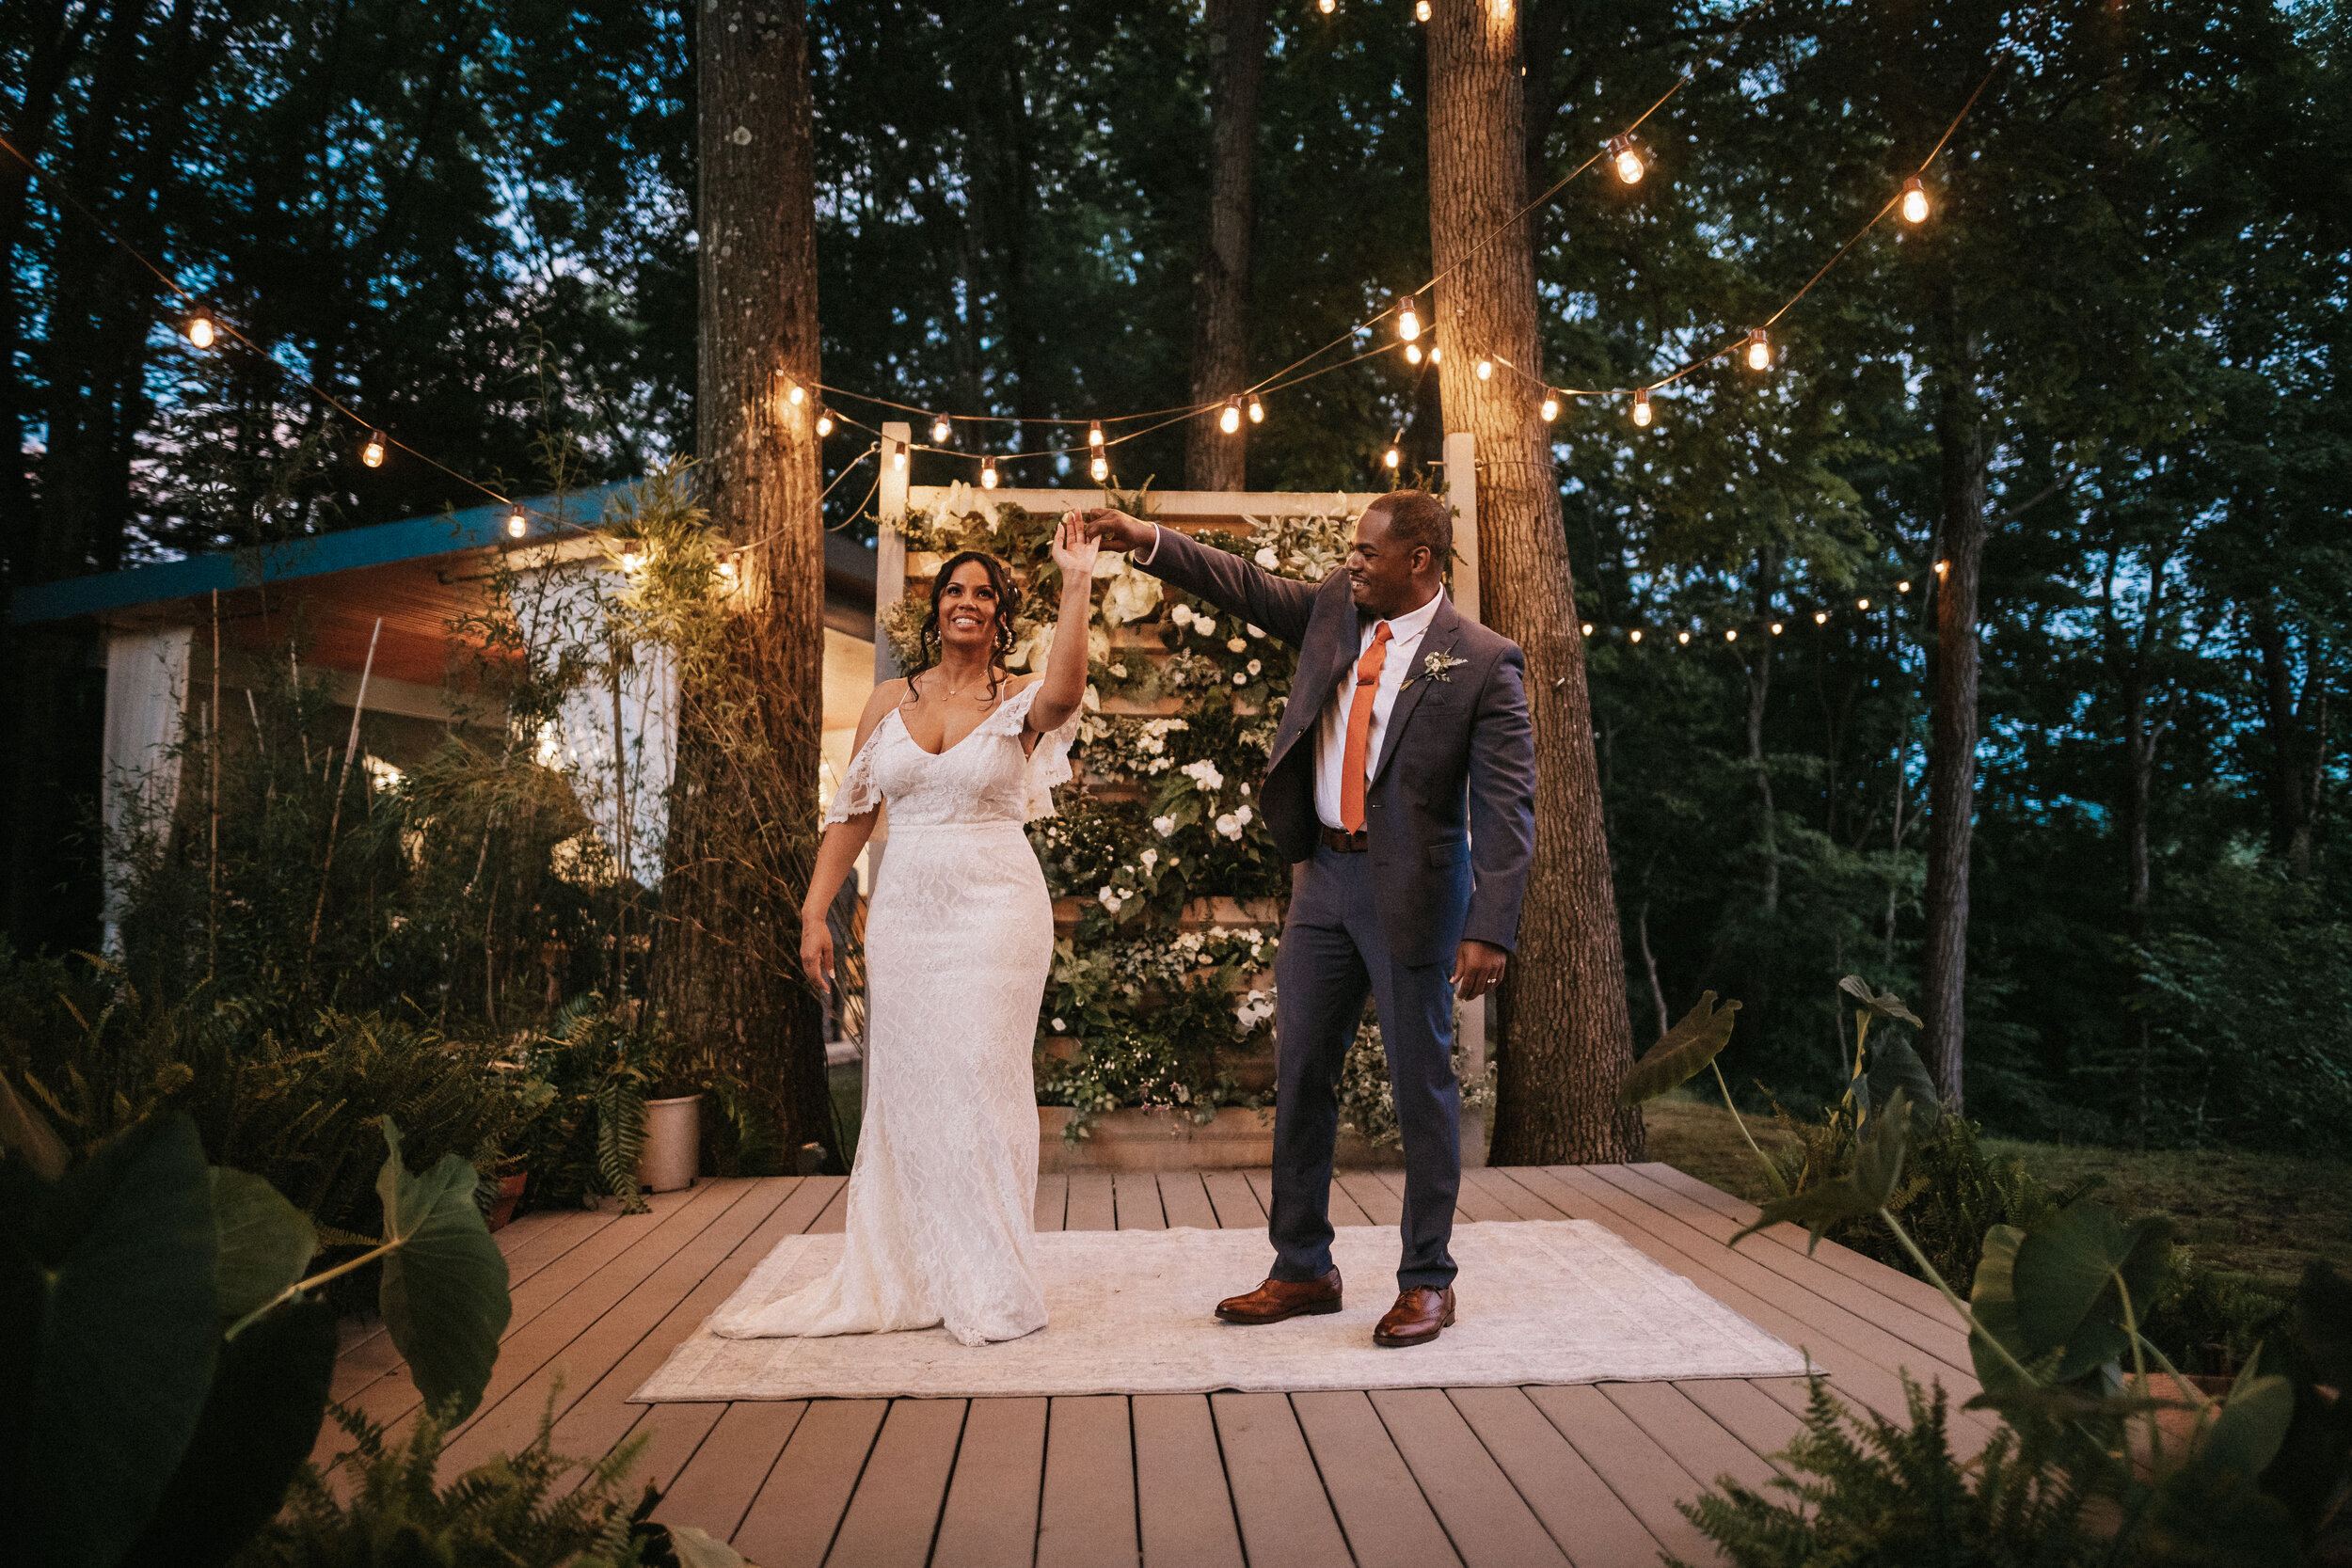 This Pittsburgh, PA wedding venue offered the perfect setting for Erin and Jessica’s intimate wedding day, from beautiful rays of sunlight to lush gardens.